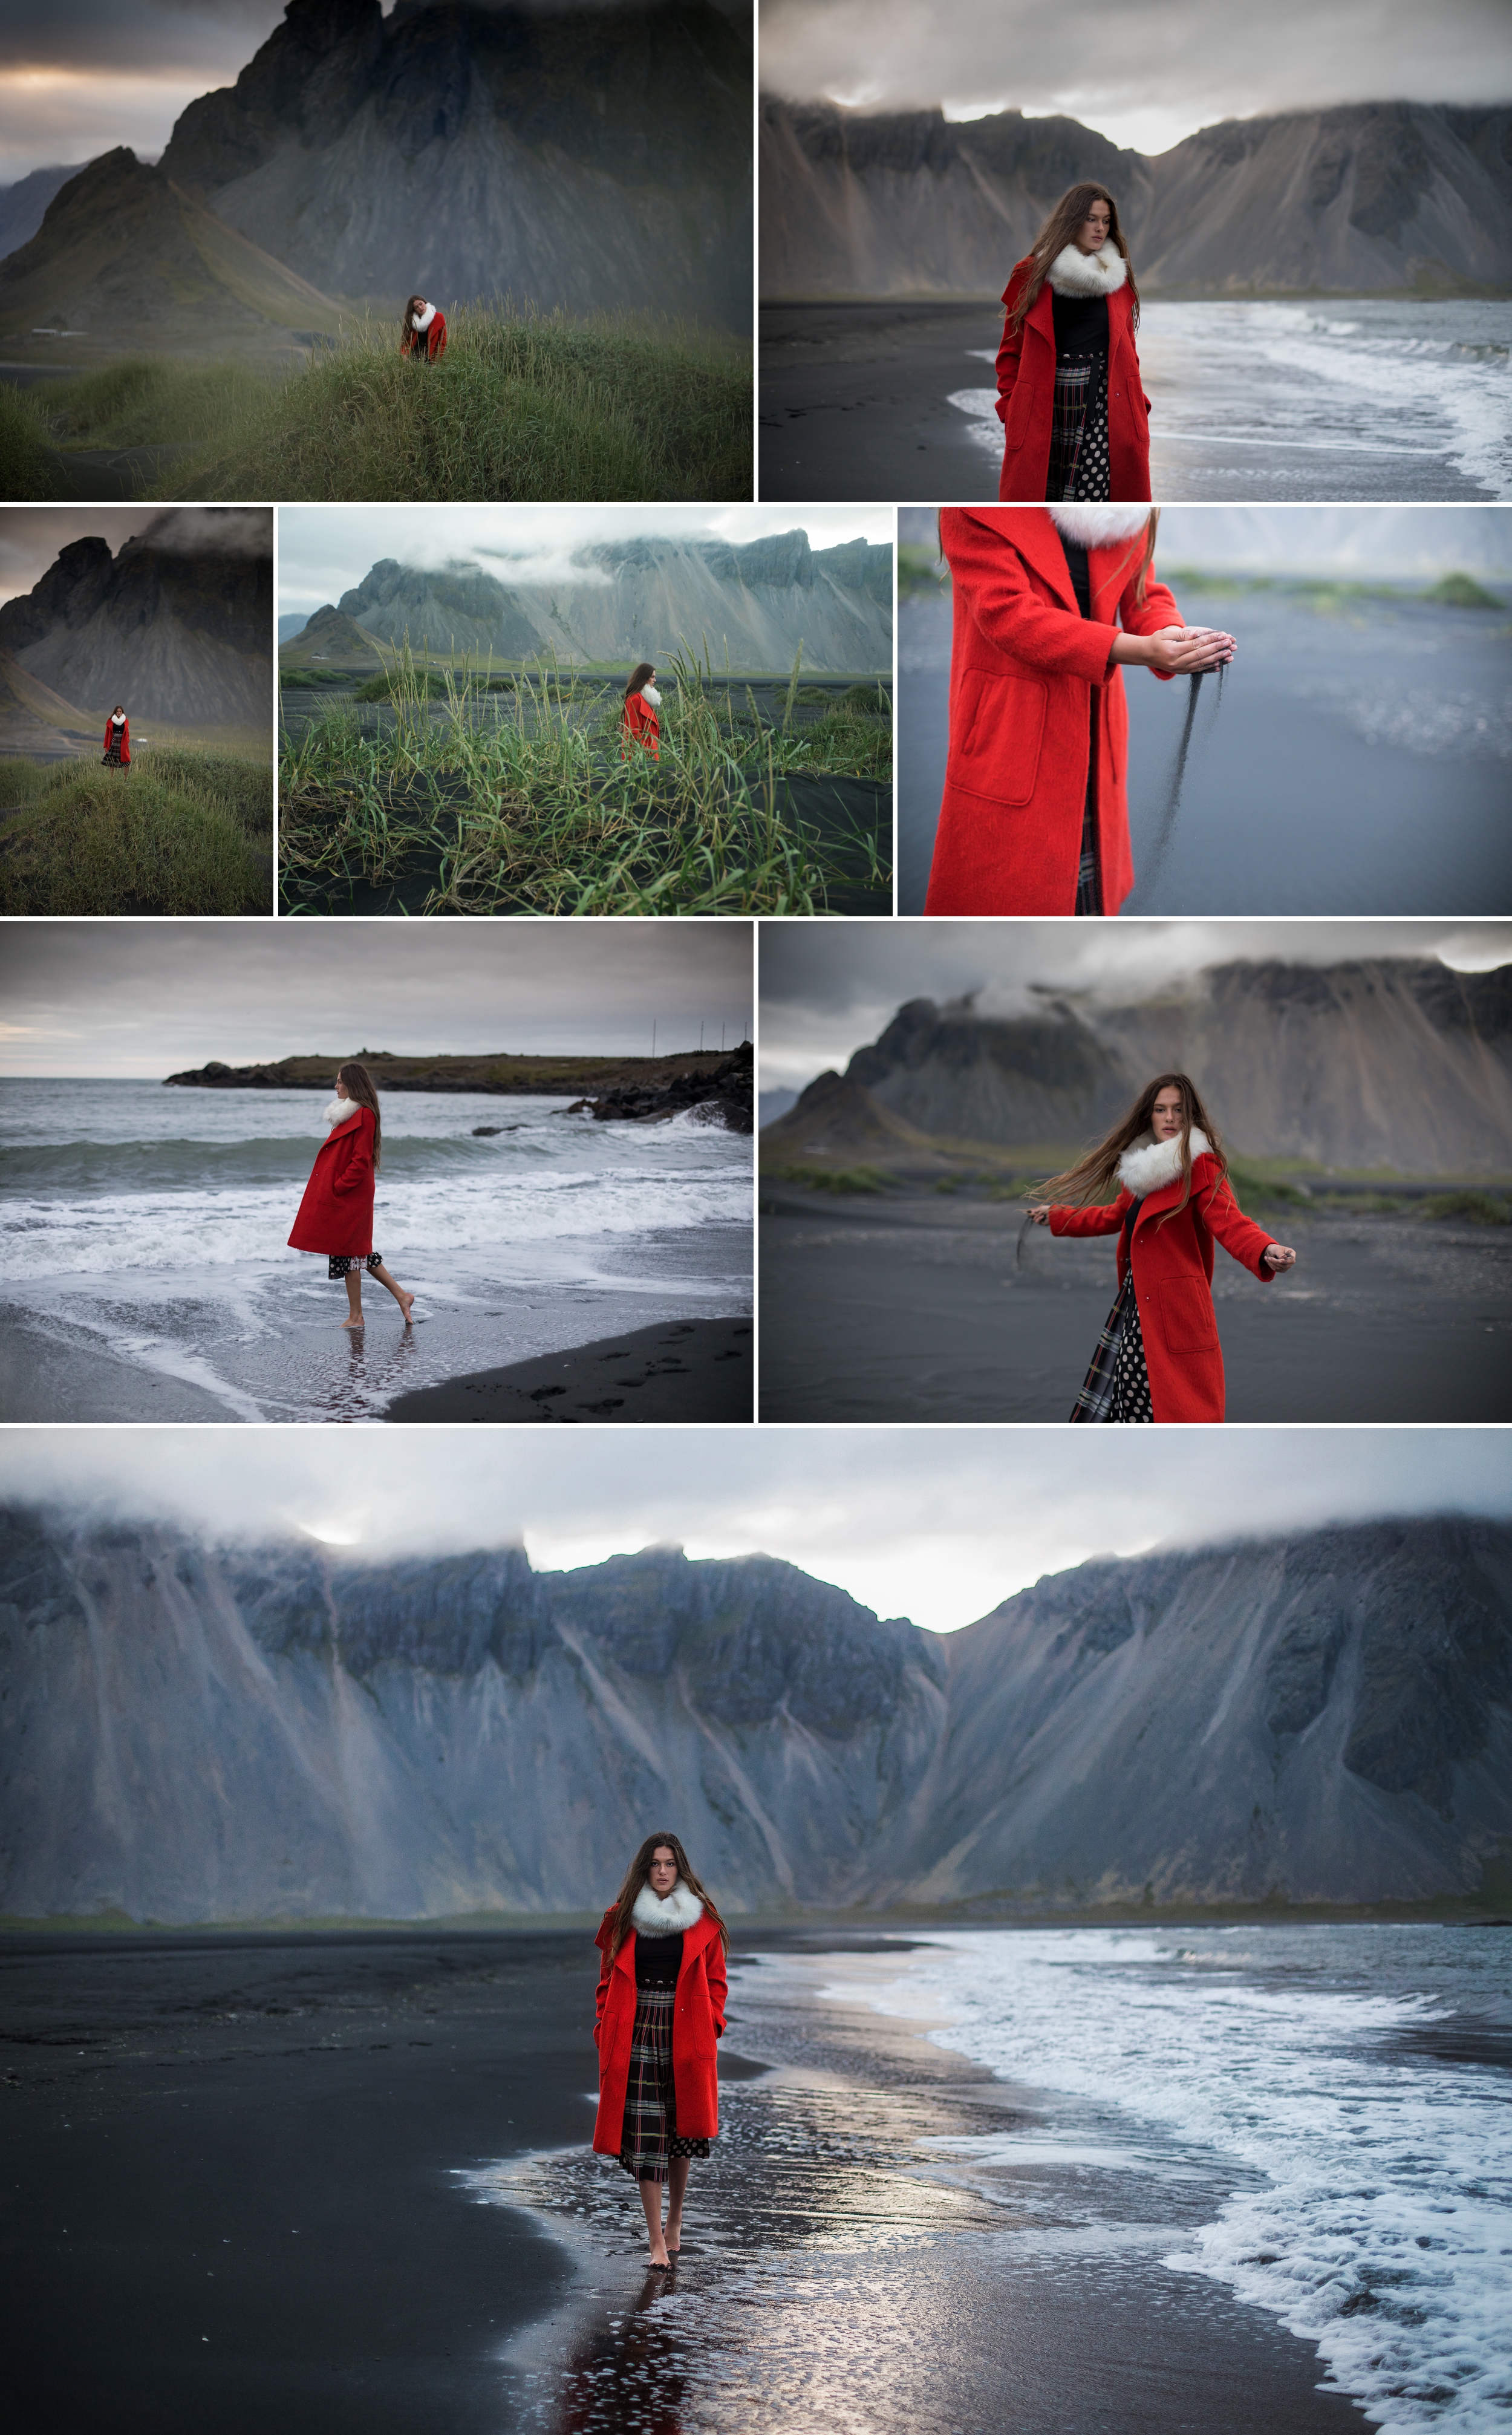 The magical black sand beaches destination photo shoot in scenic Iceland.